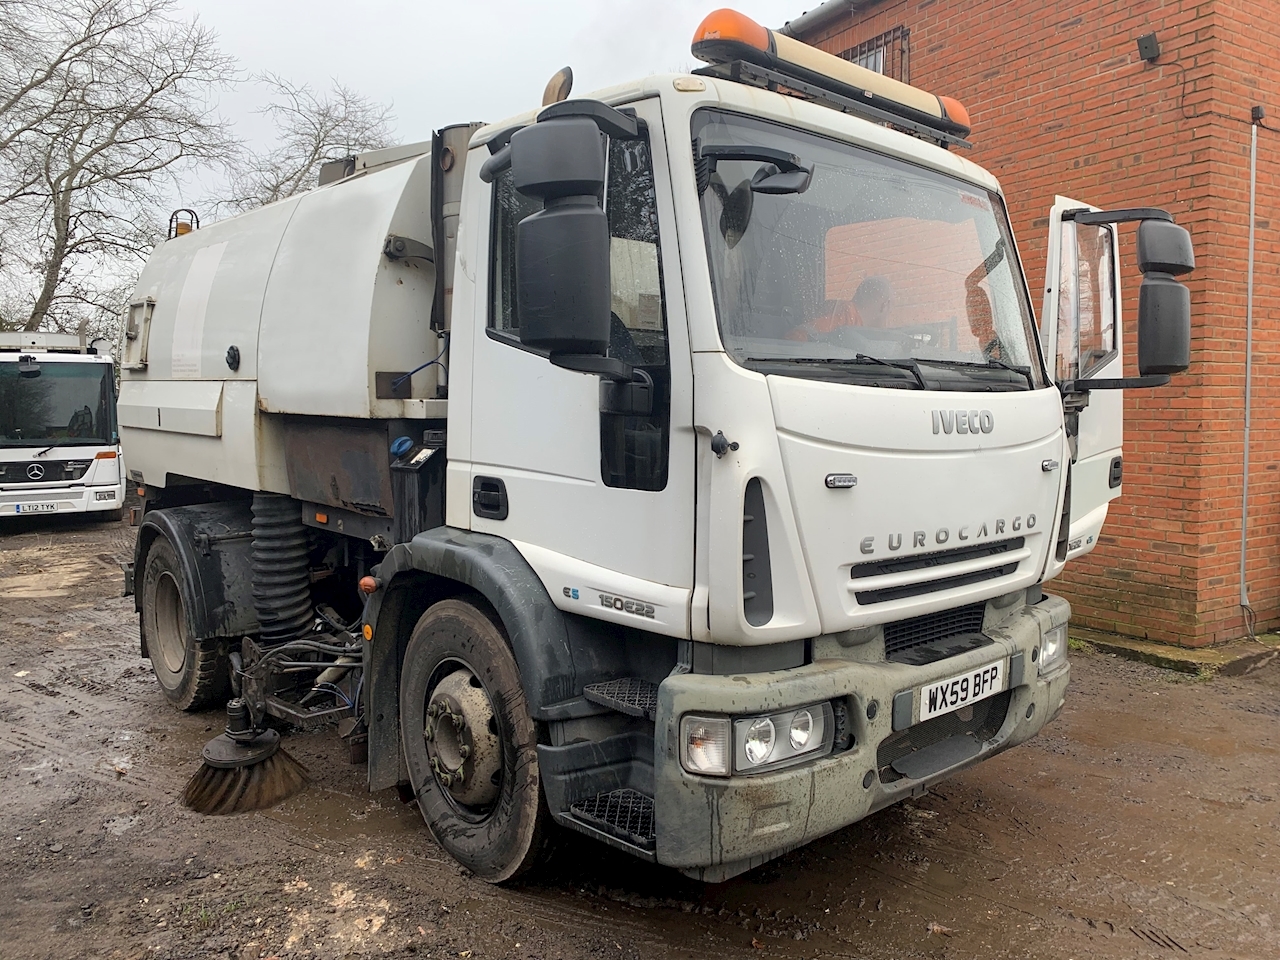 150E22 Duel Sweeper with Johnson VT650 Equipment